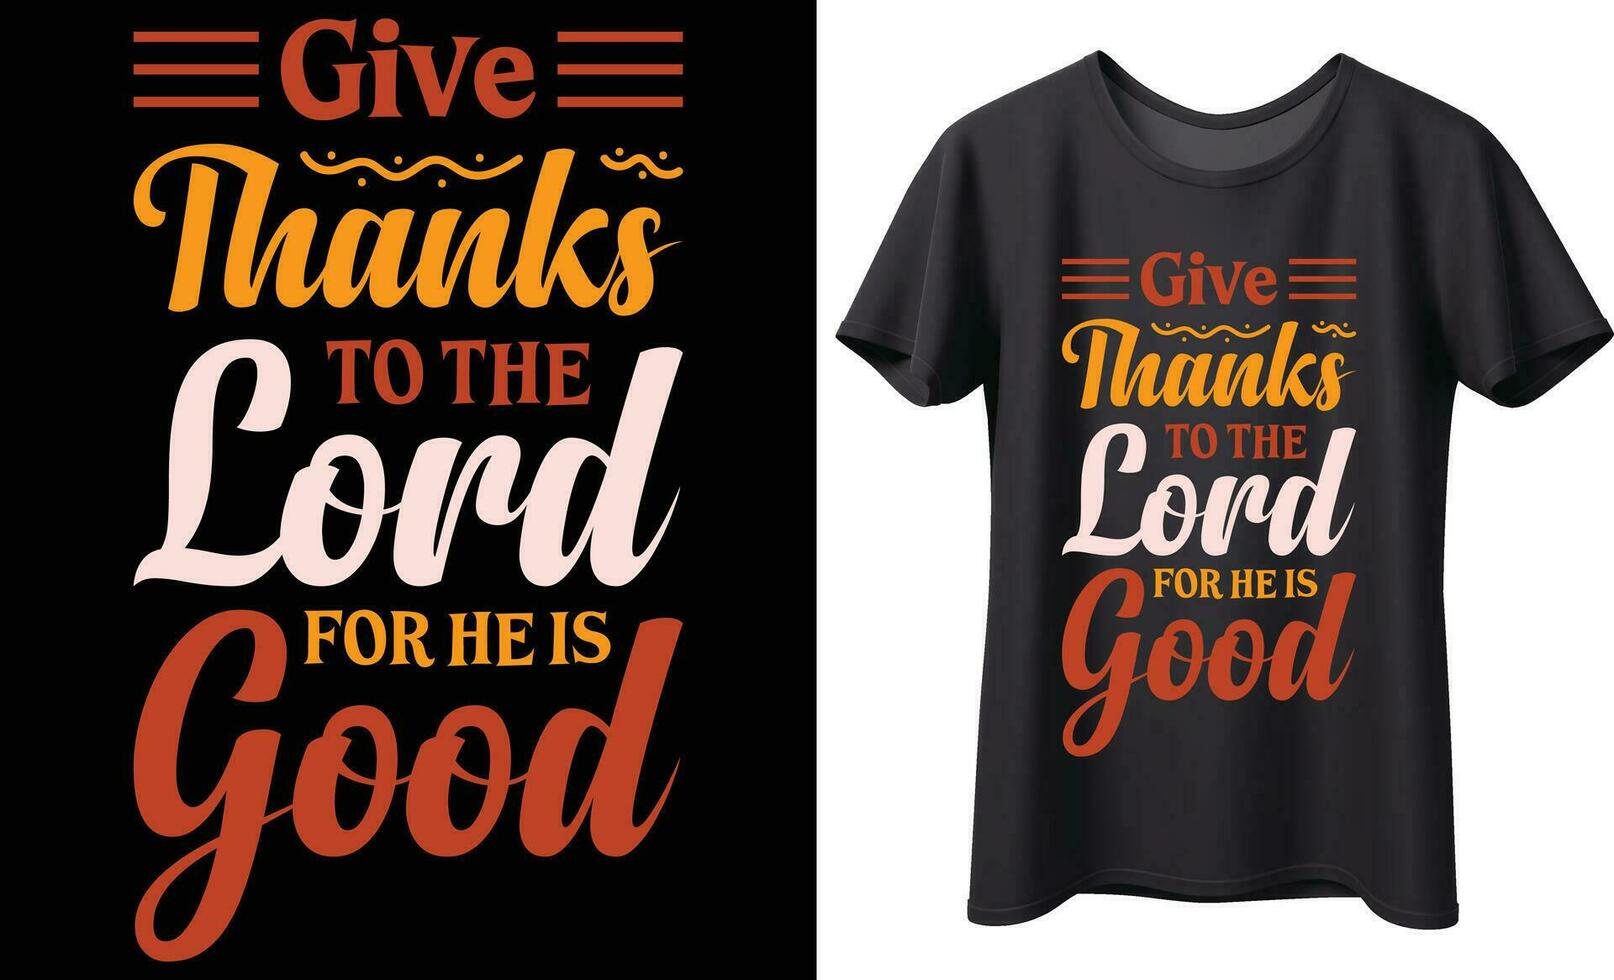 Give thanks to the lord for he is good typography vector t-shirt Design. Perfect for print items and bag, banner, sticker, template. Handwritten vector illustration. Isolated on black background.